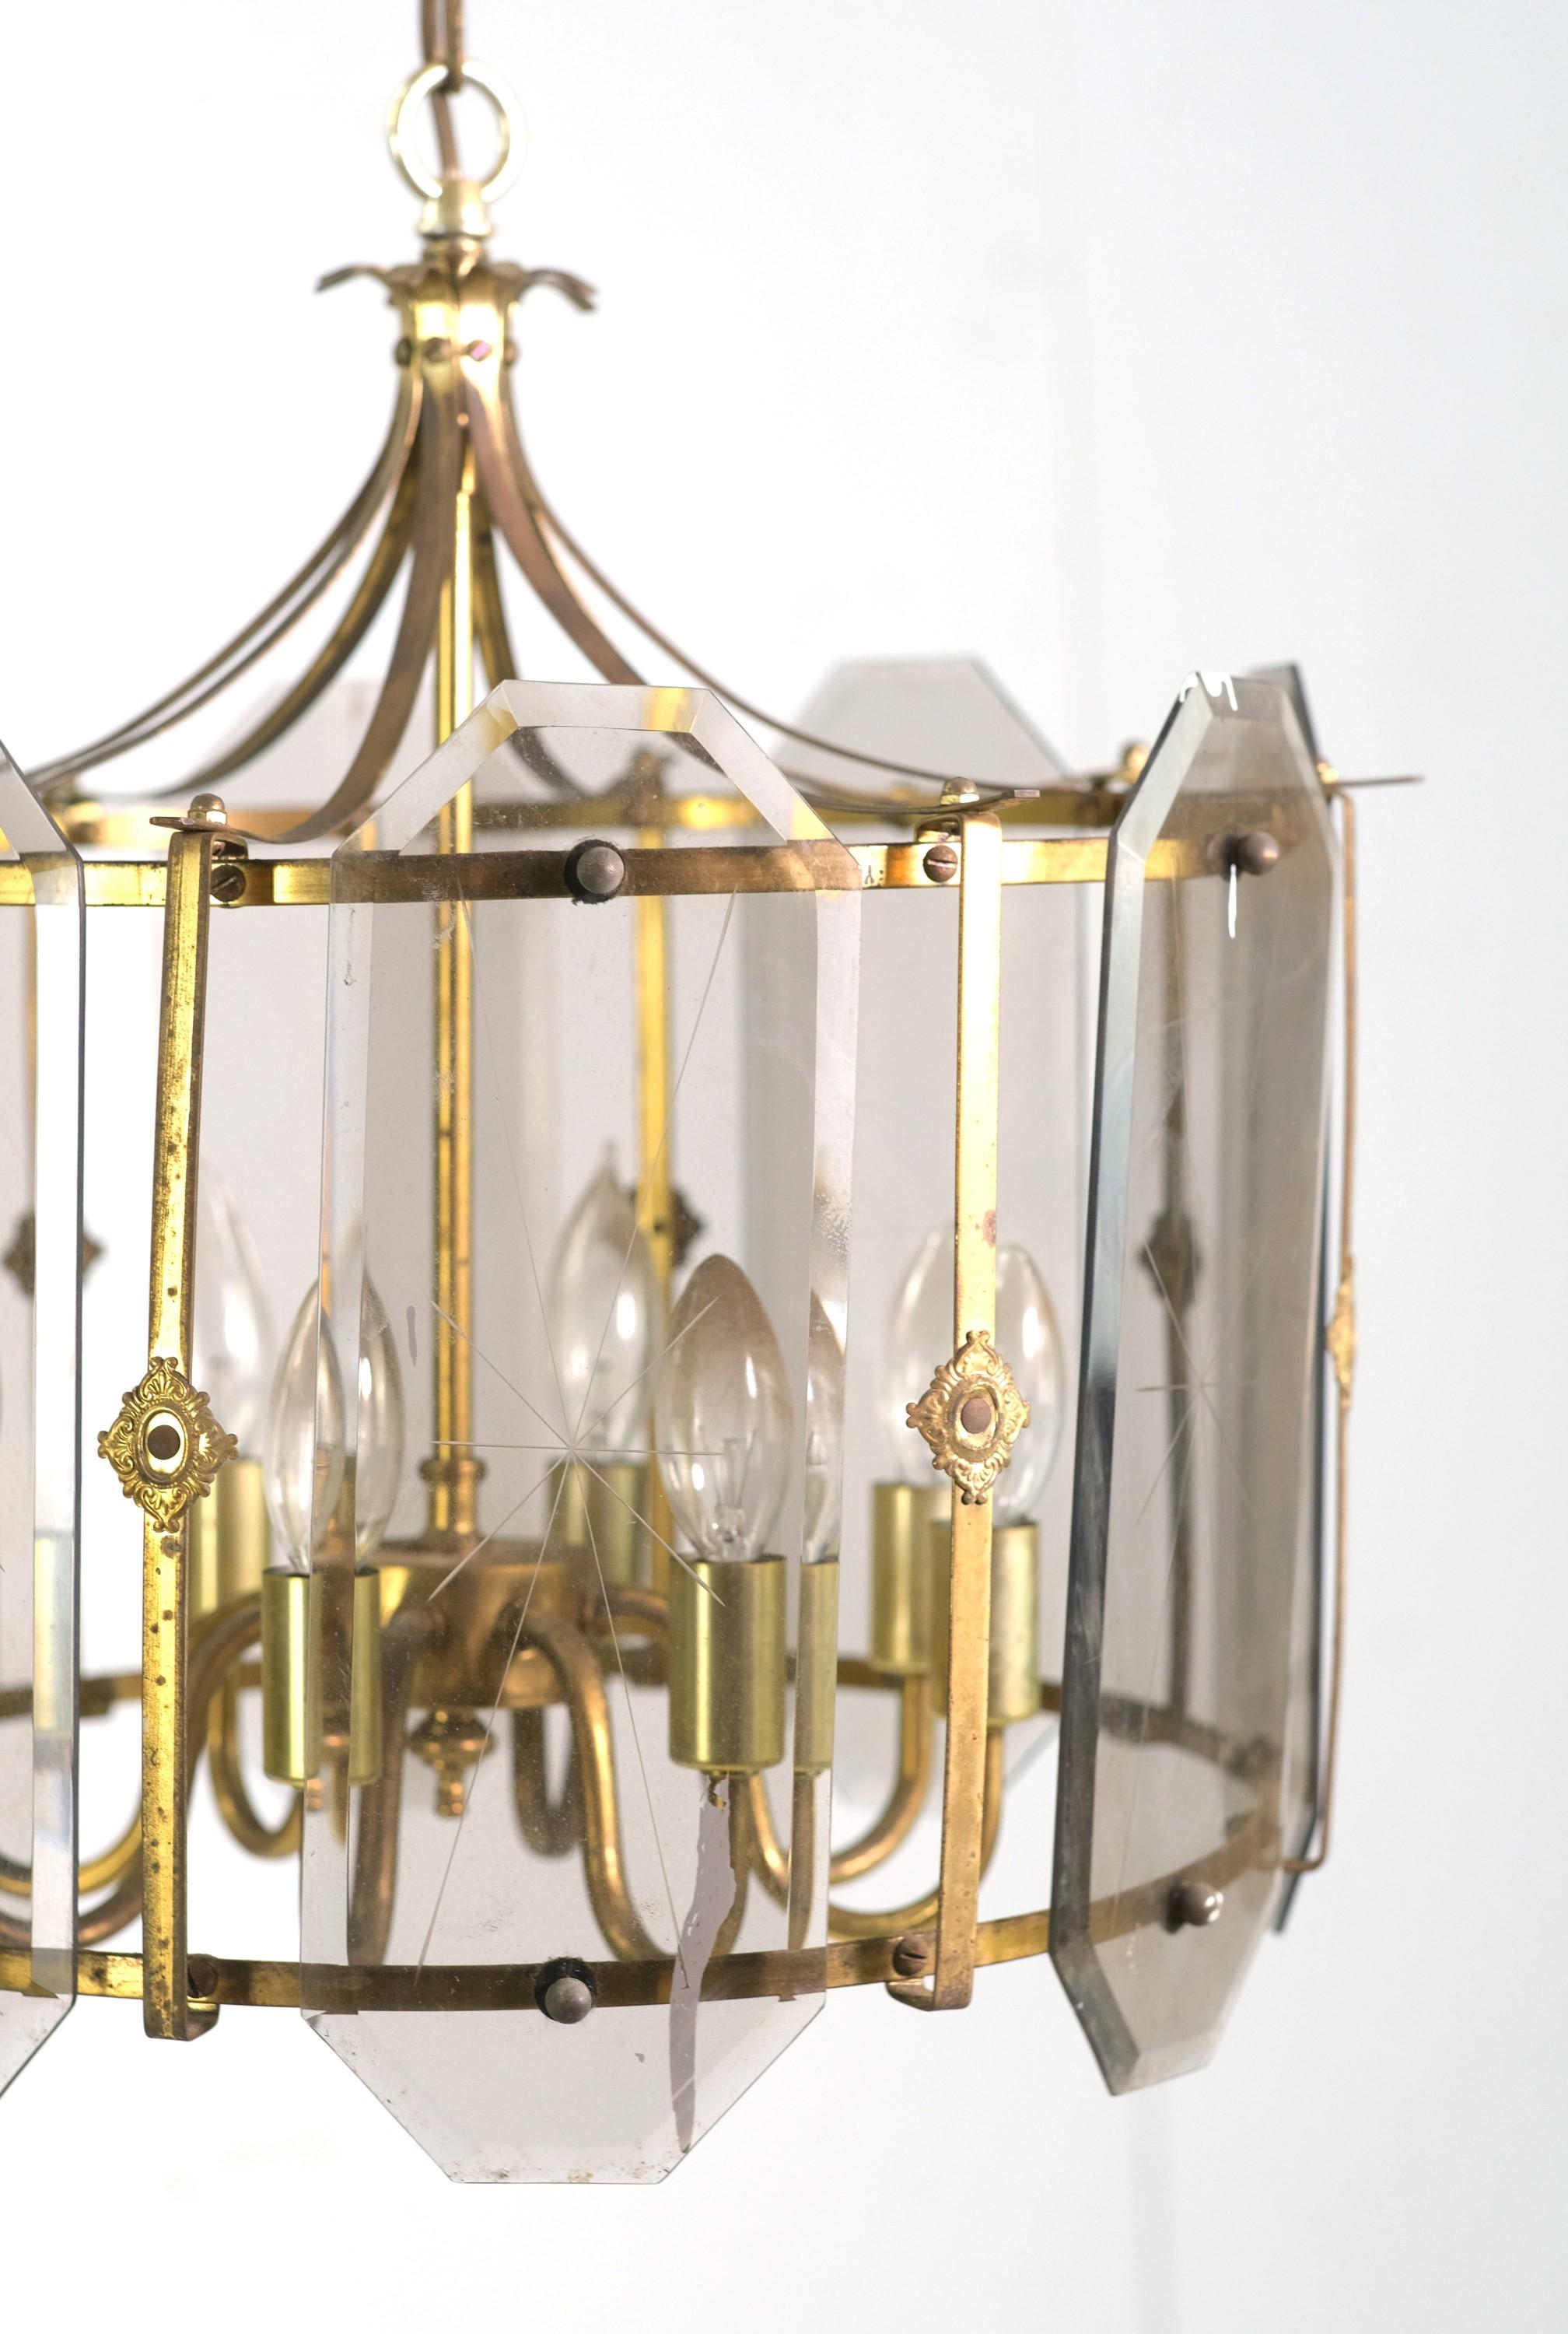 Eight arm brass pendant light with beveled and cut clear octagonal glass panes. Each panes features an etched center star design. The beveled glass panes also have a slight violet tint. Cleaned and restored. Please note, this item is located in our